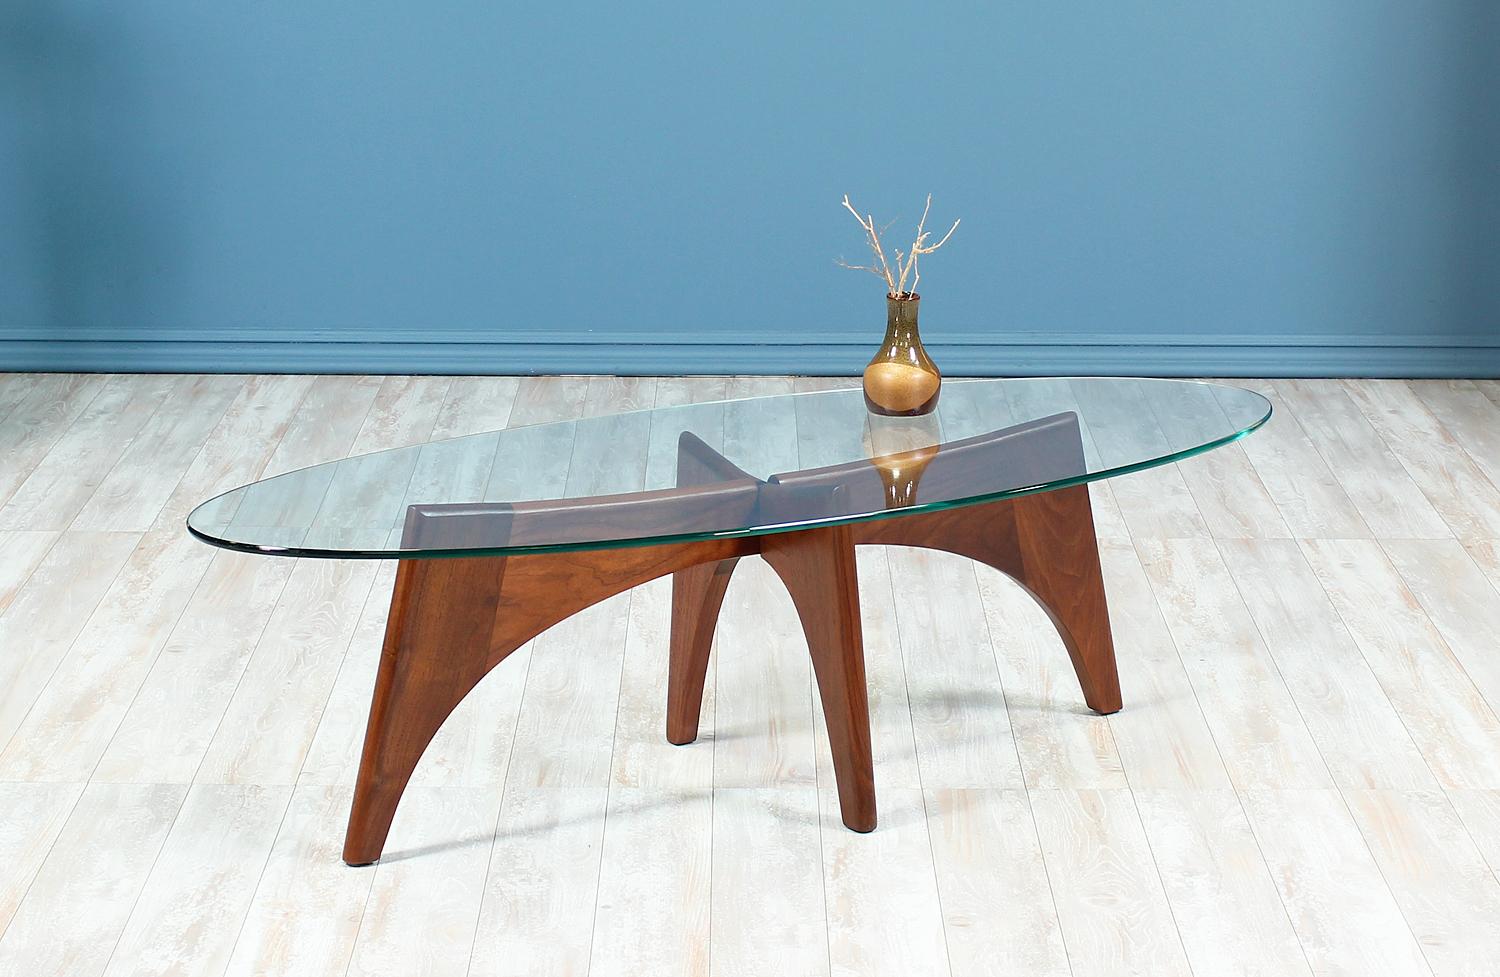 Mid-Century Modern Adrian Pearsall Coffee Table for Craft Associates